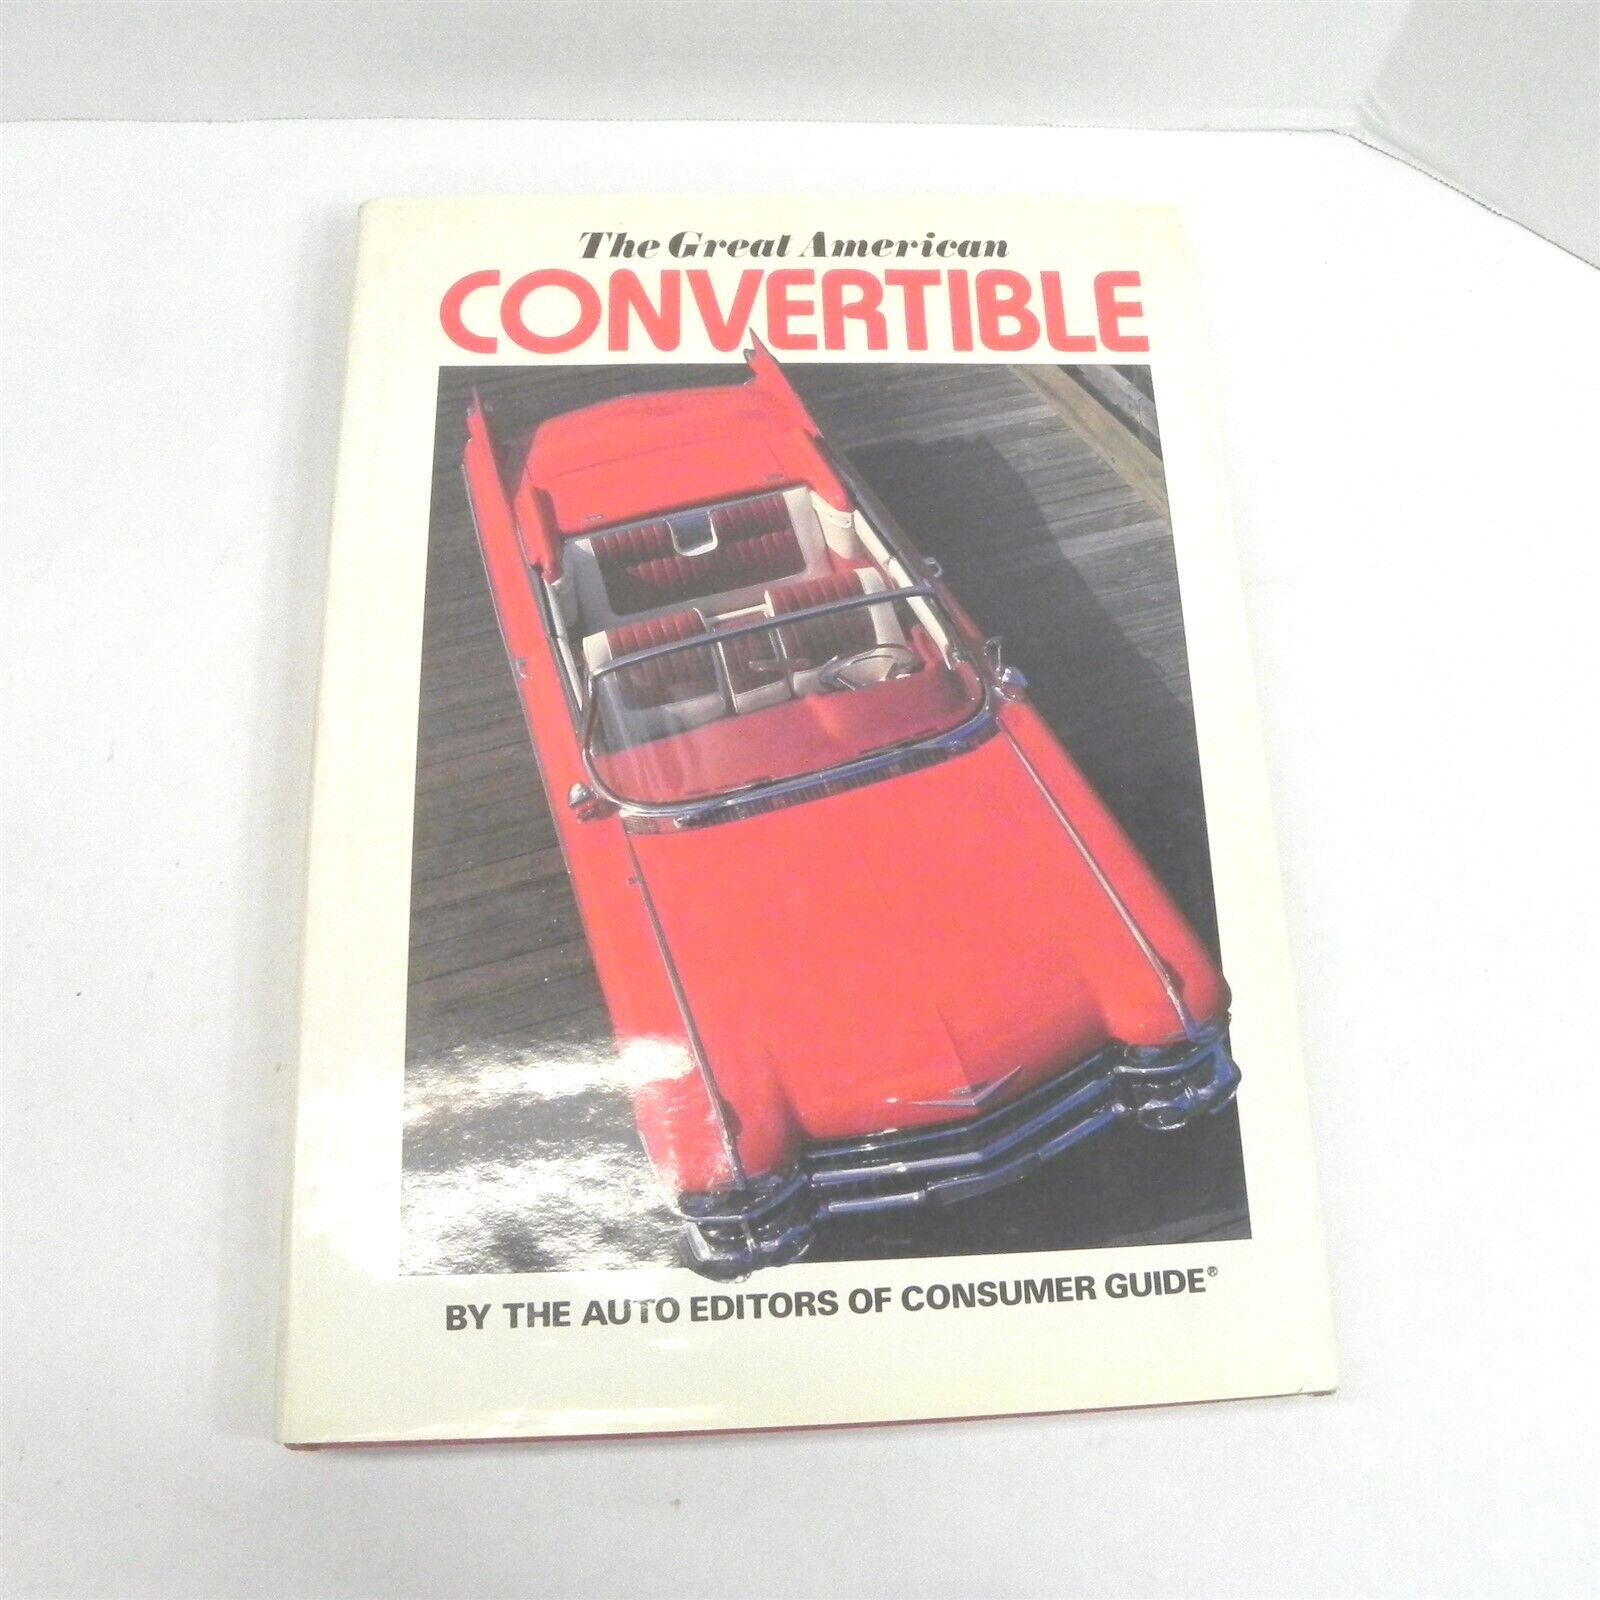 1991 THE GREAT AMERICAN CONVERTIBLE BY EDITORS OF CONSUMER GUIDE HARDBACK BOOK